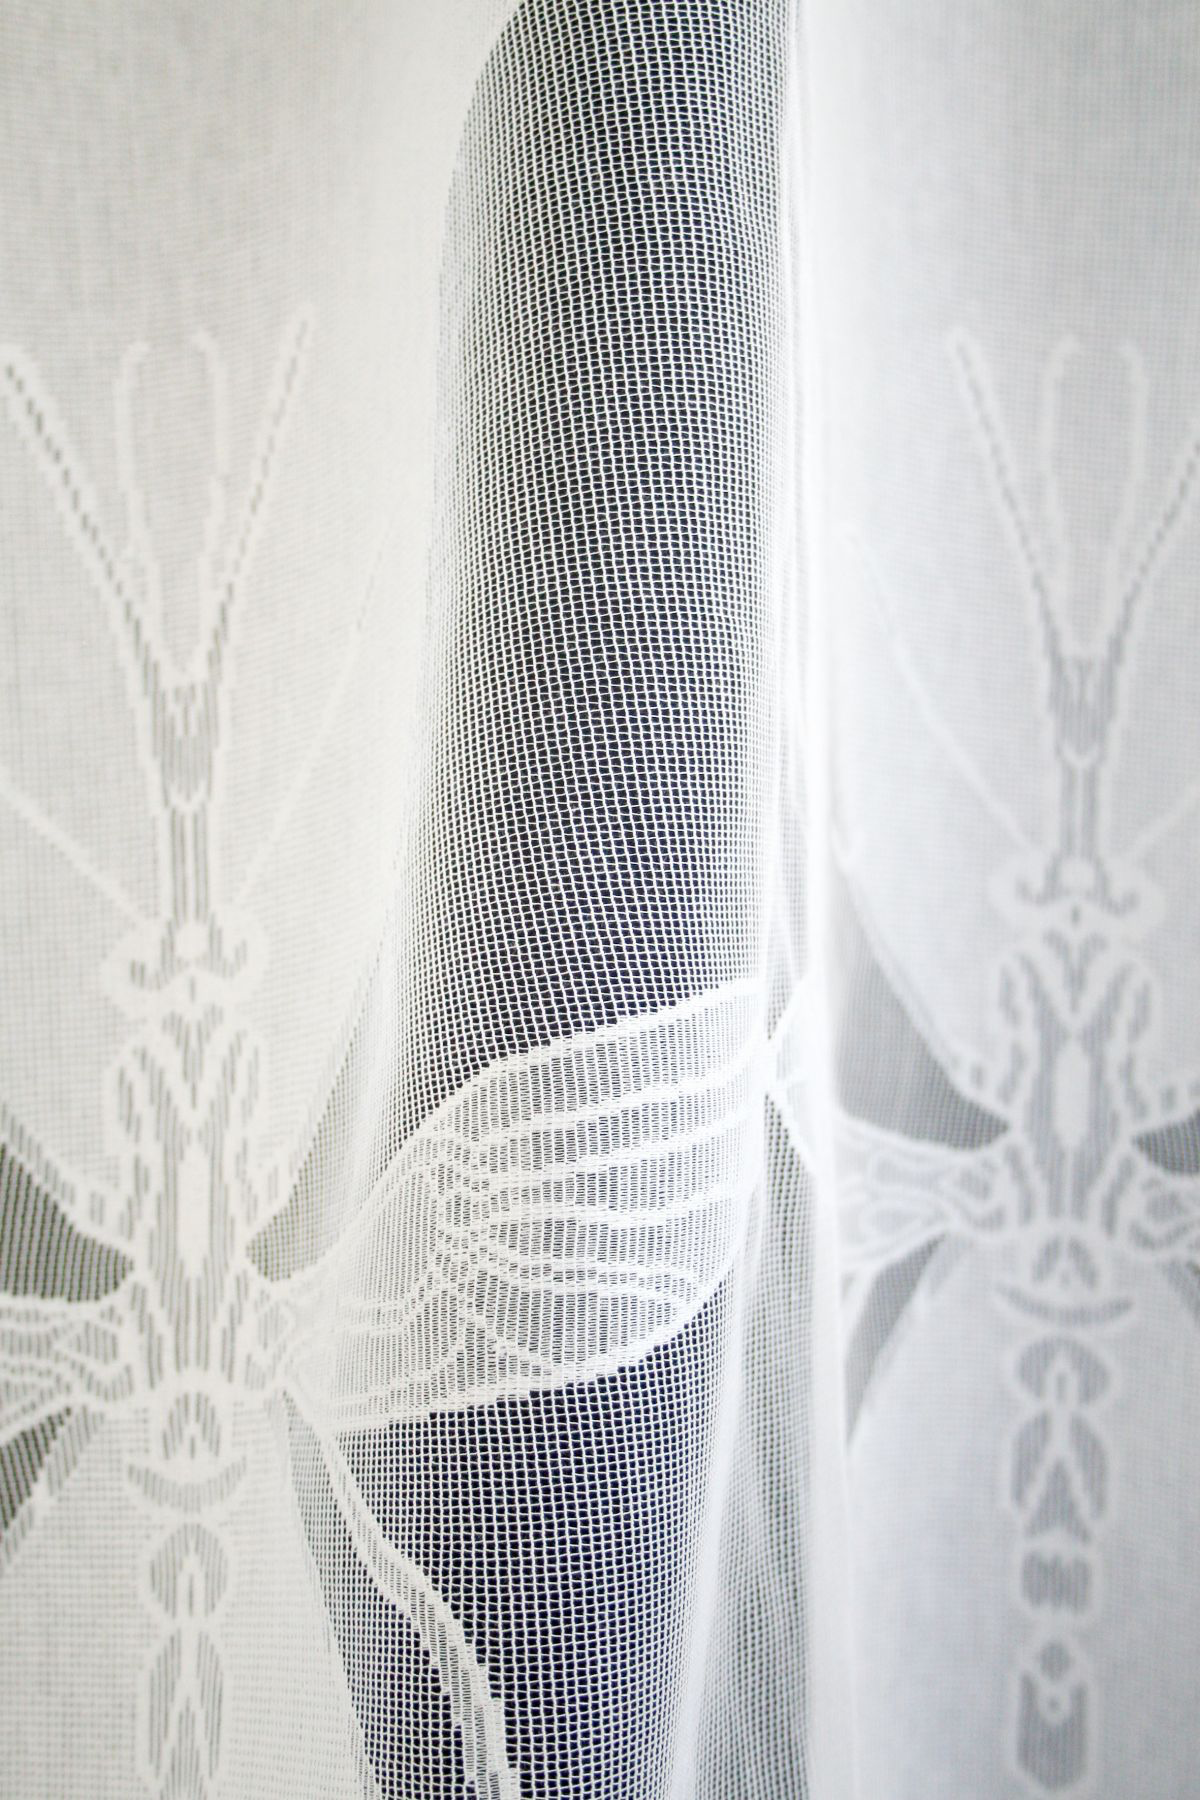 mosquito large lace fabric by timorous beasties on adorn.house